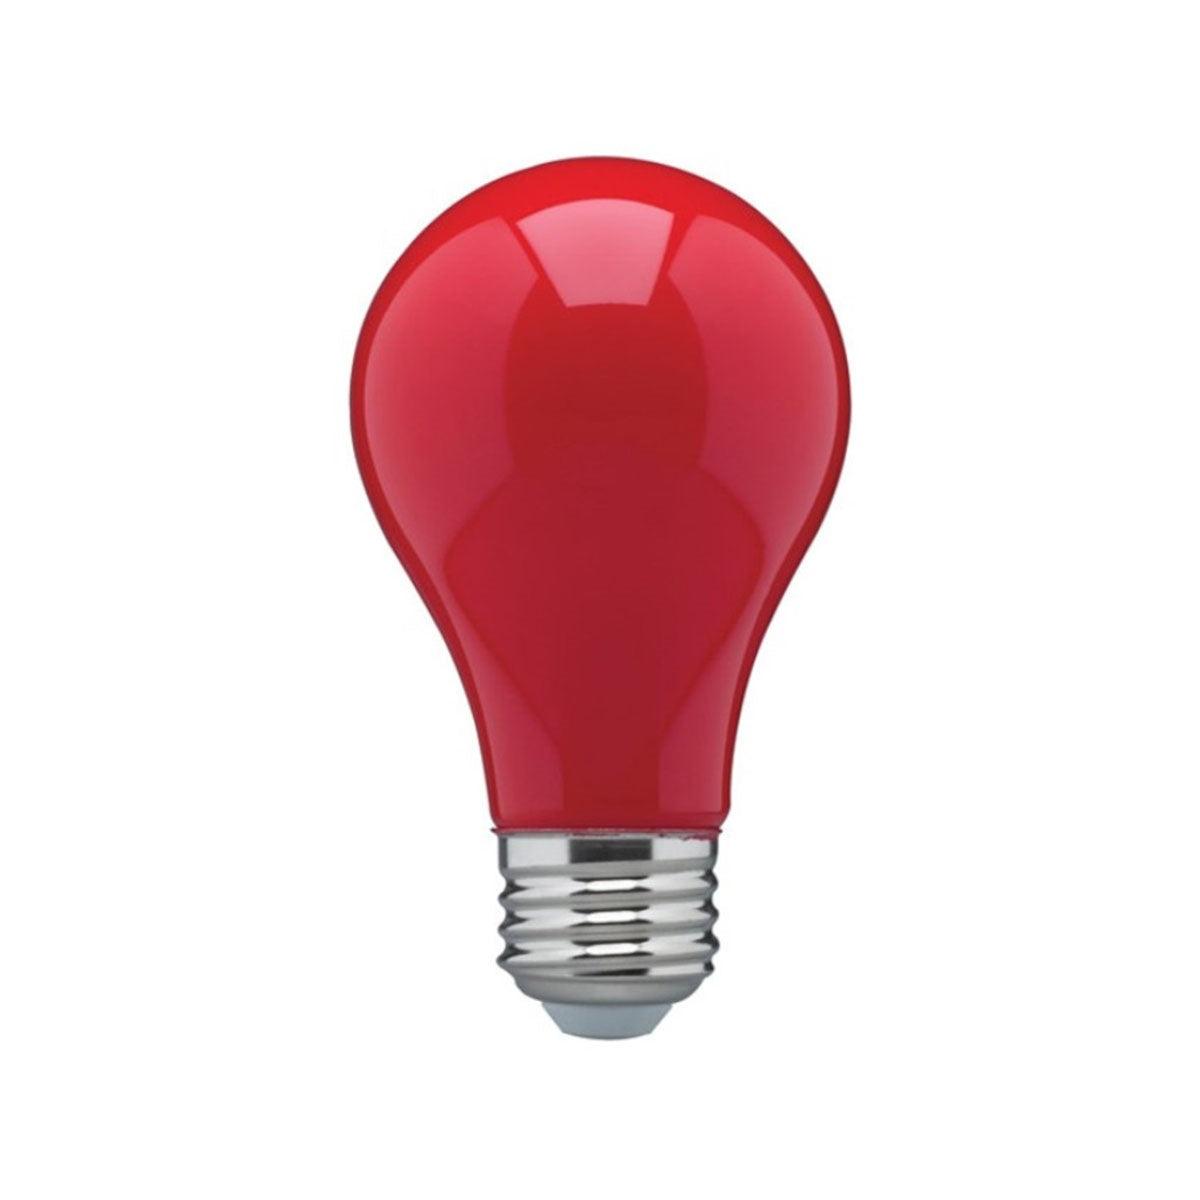 A19 LED Bulb, 100W Equivalent, 8 Watt, Lumens, Red, E26 Medium Base, Frosted Finish - Bees Lighting